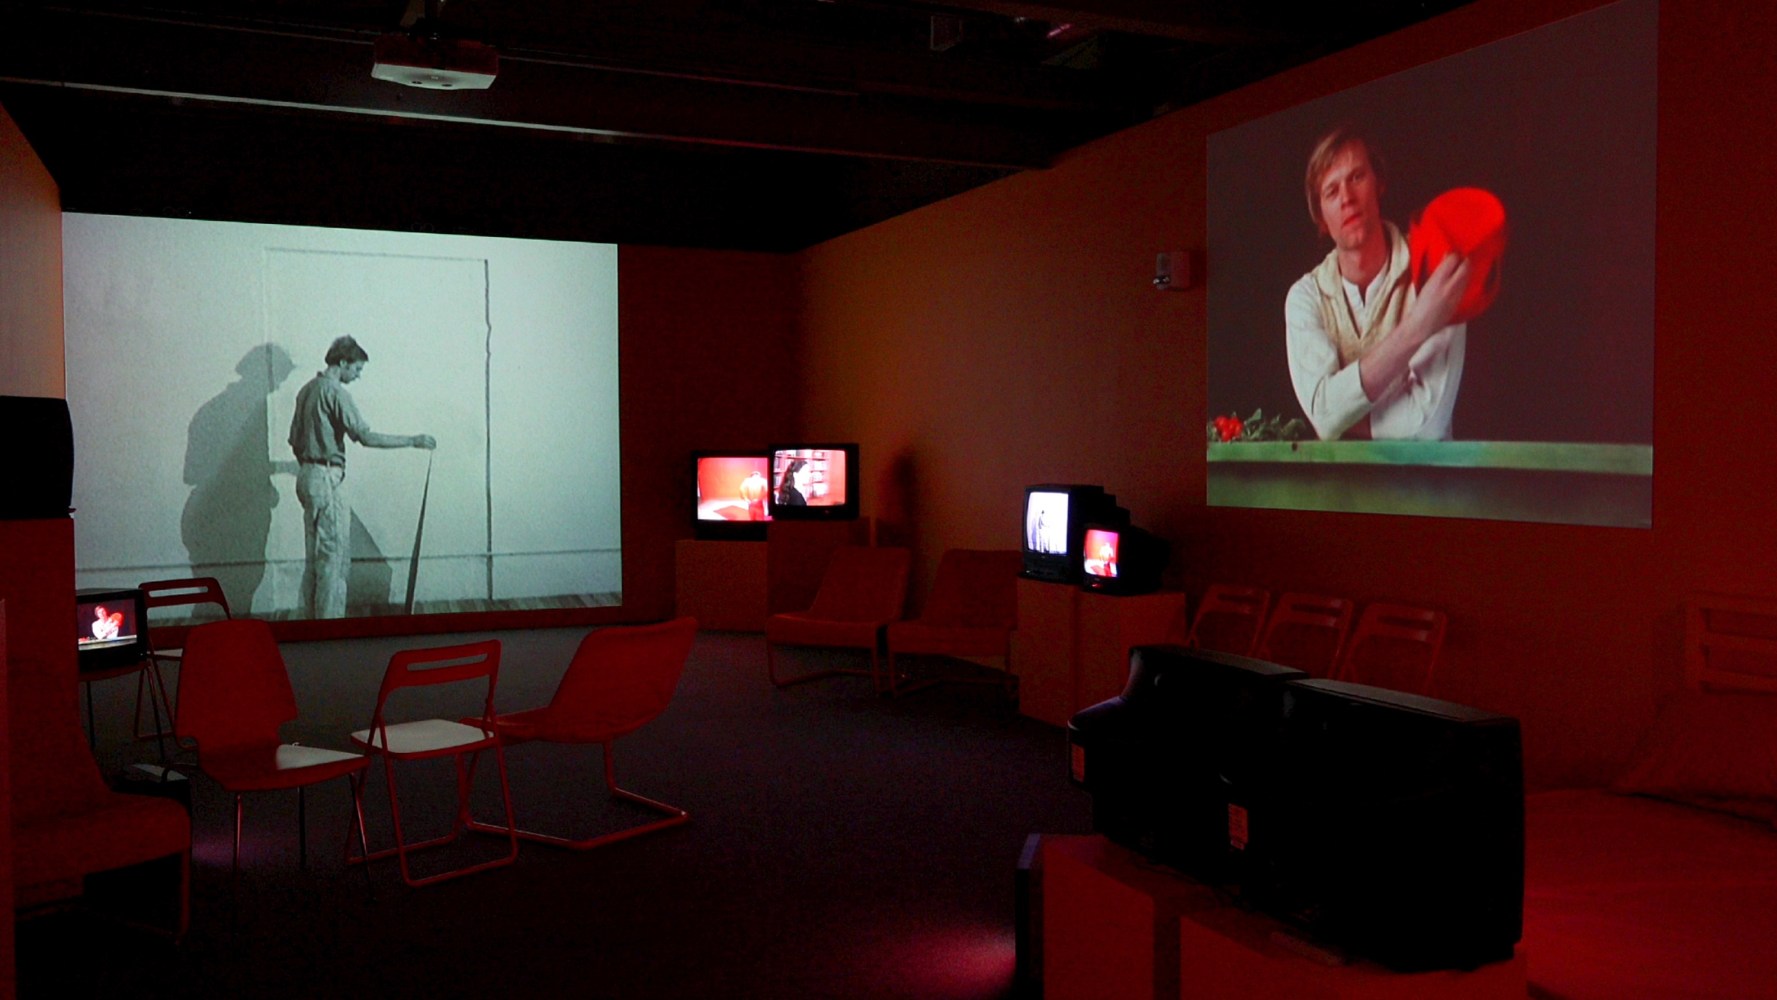 Charles Atlas
Cowboy Body
Installation view at&amp;nbsp;The Contemporary,&amp;nbsp;Austin, 2015